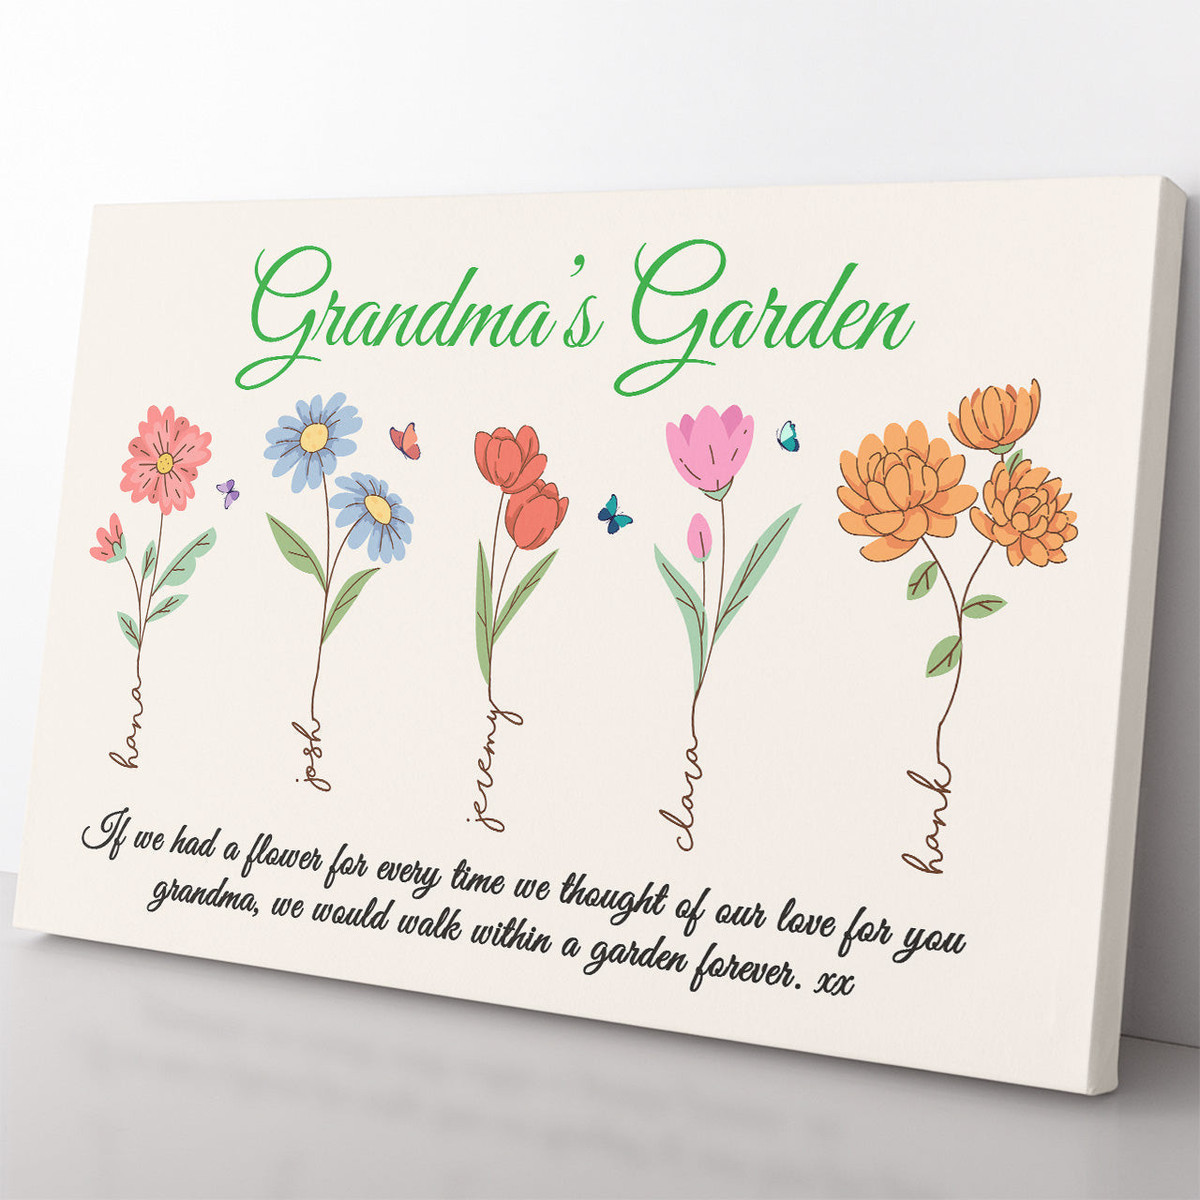 Custom Grandkid Names Grandma's Garden Floral Canvas Gift Ideas, Thought of Our Love for You Canvas Gift for Grandma